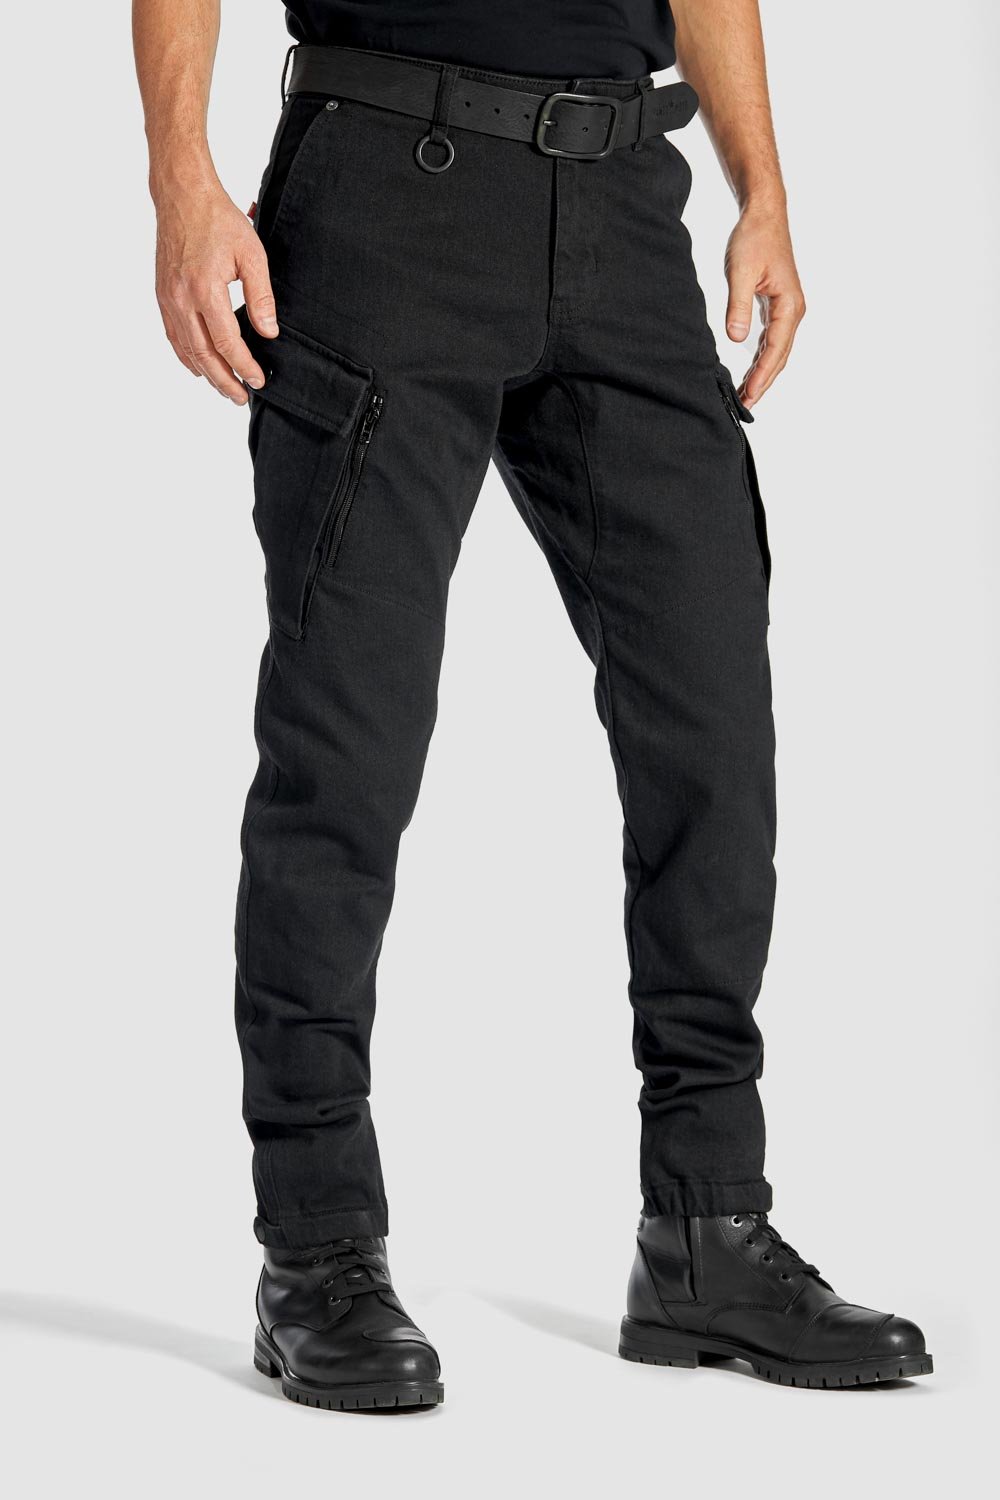 MARK KEV 01 – Motorcycle Jeans for Men with Chino Style Cordura® 1